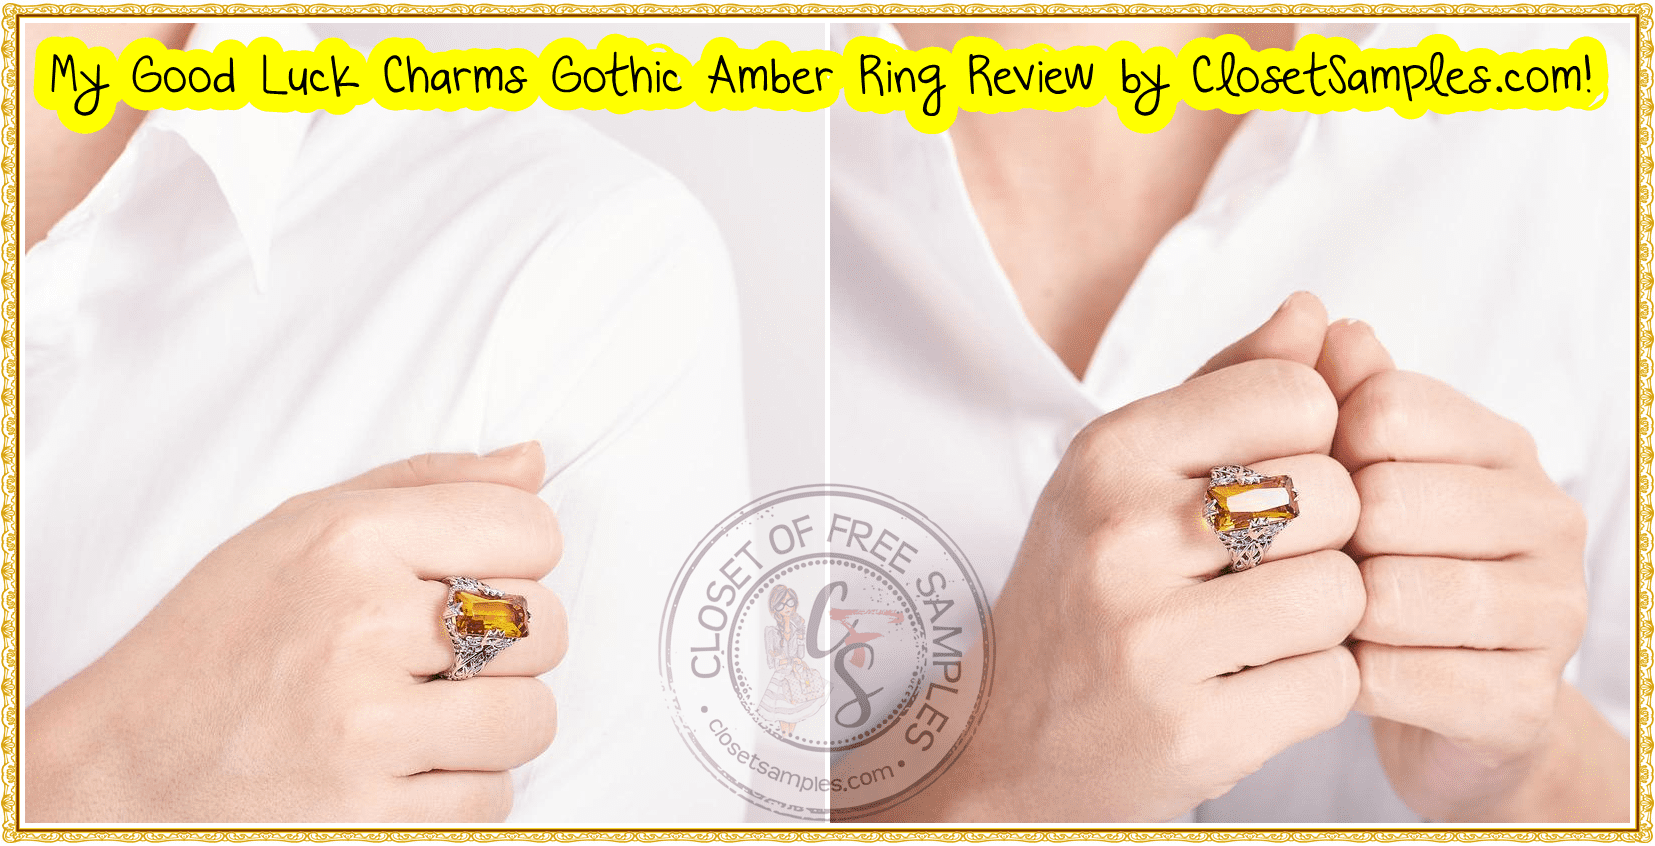 The-Good-Luck-Charms-Gothic-Amber-Ring-Review-Closetsamples-3.png